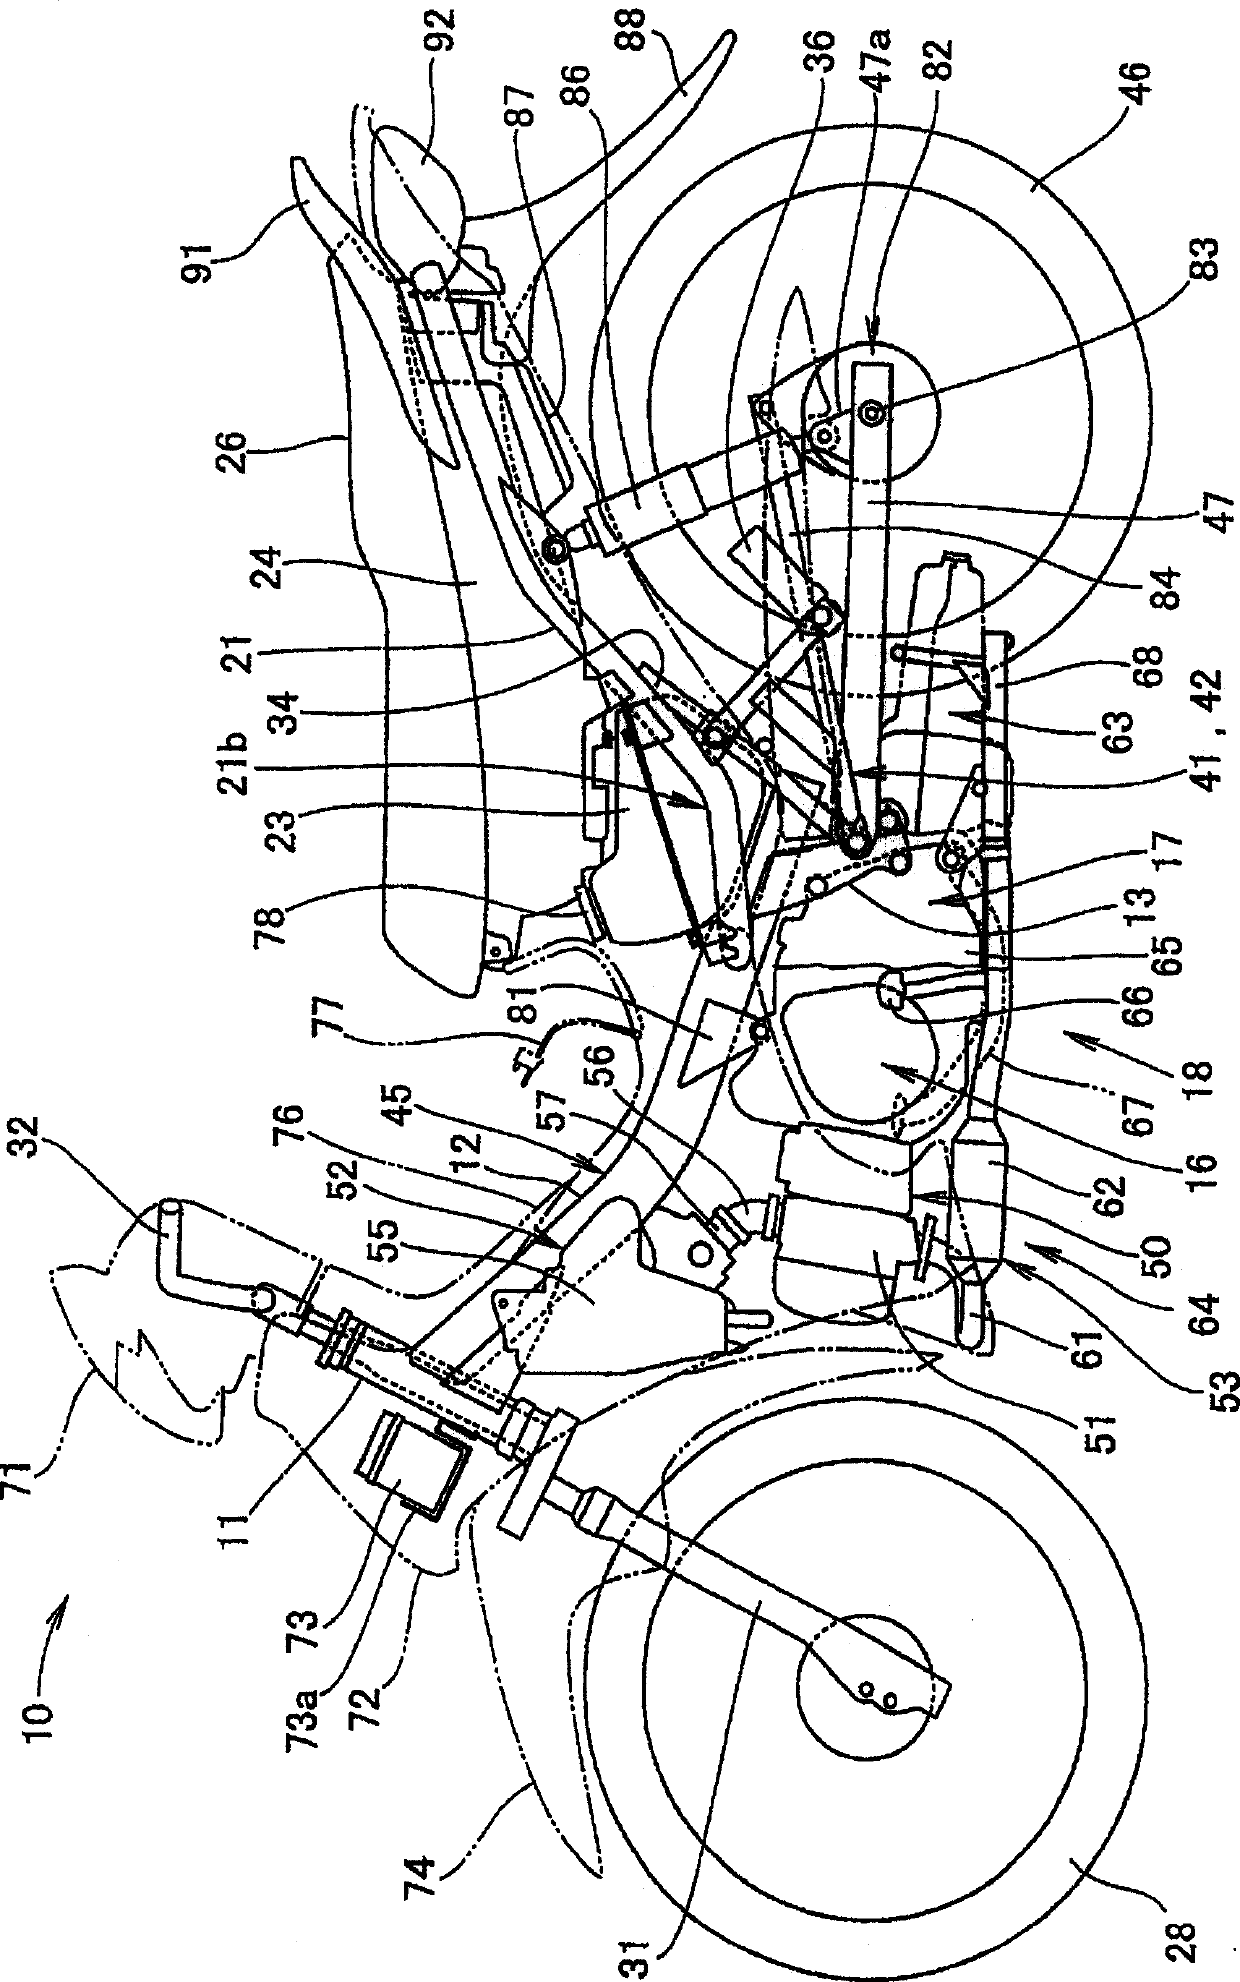 Frame structure of two-wheels motorcycle